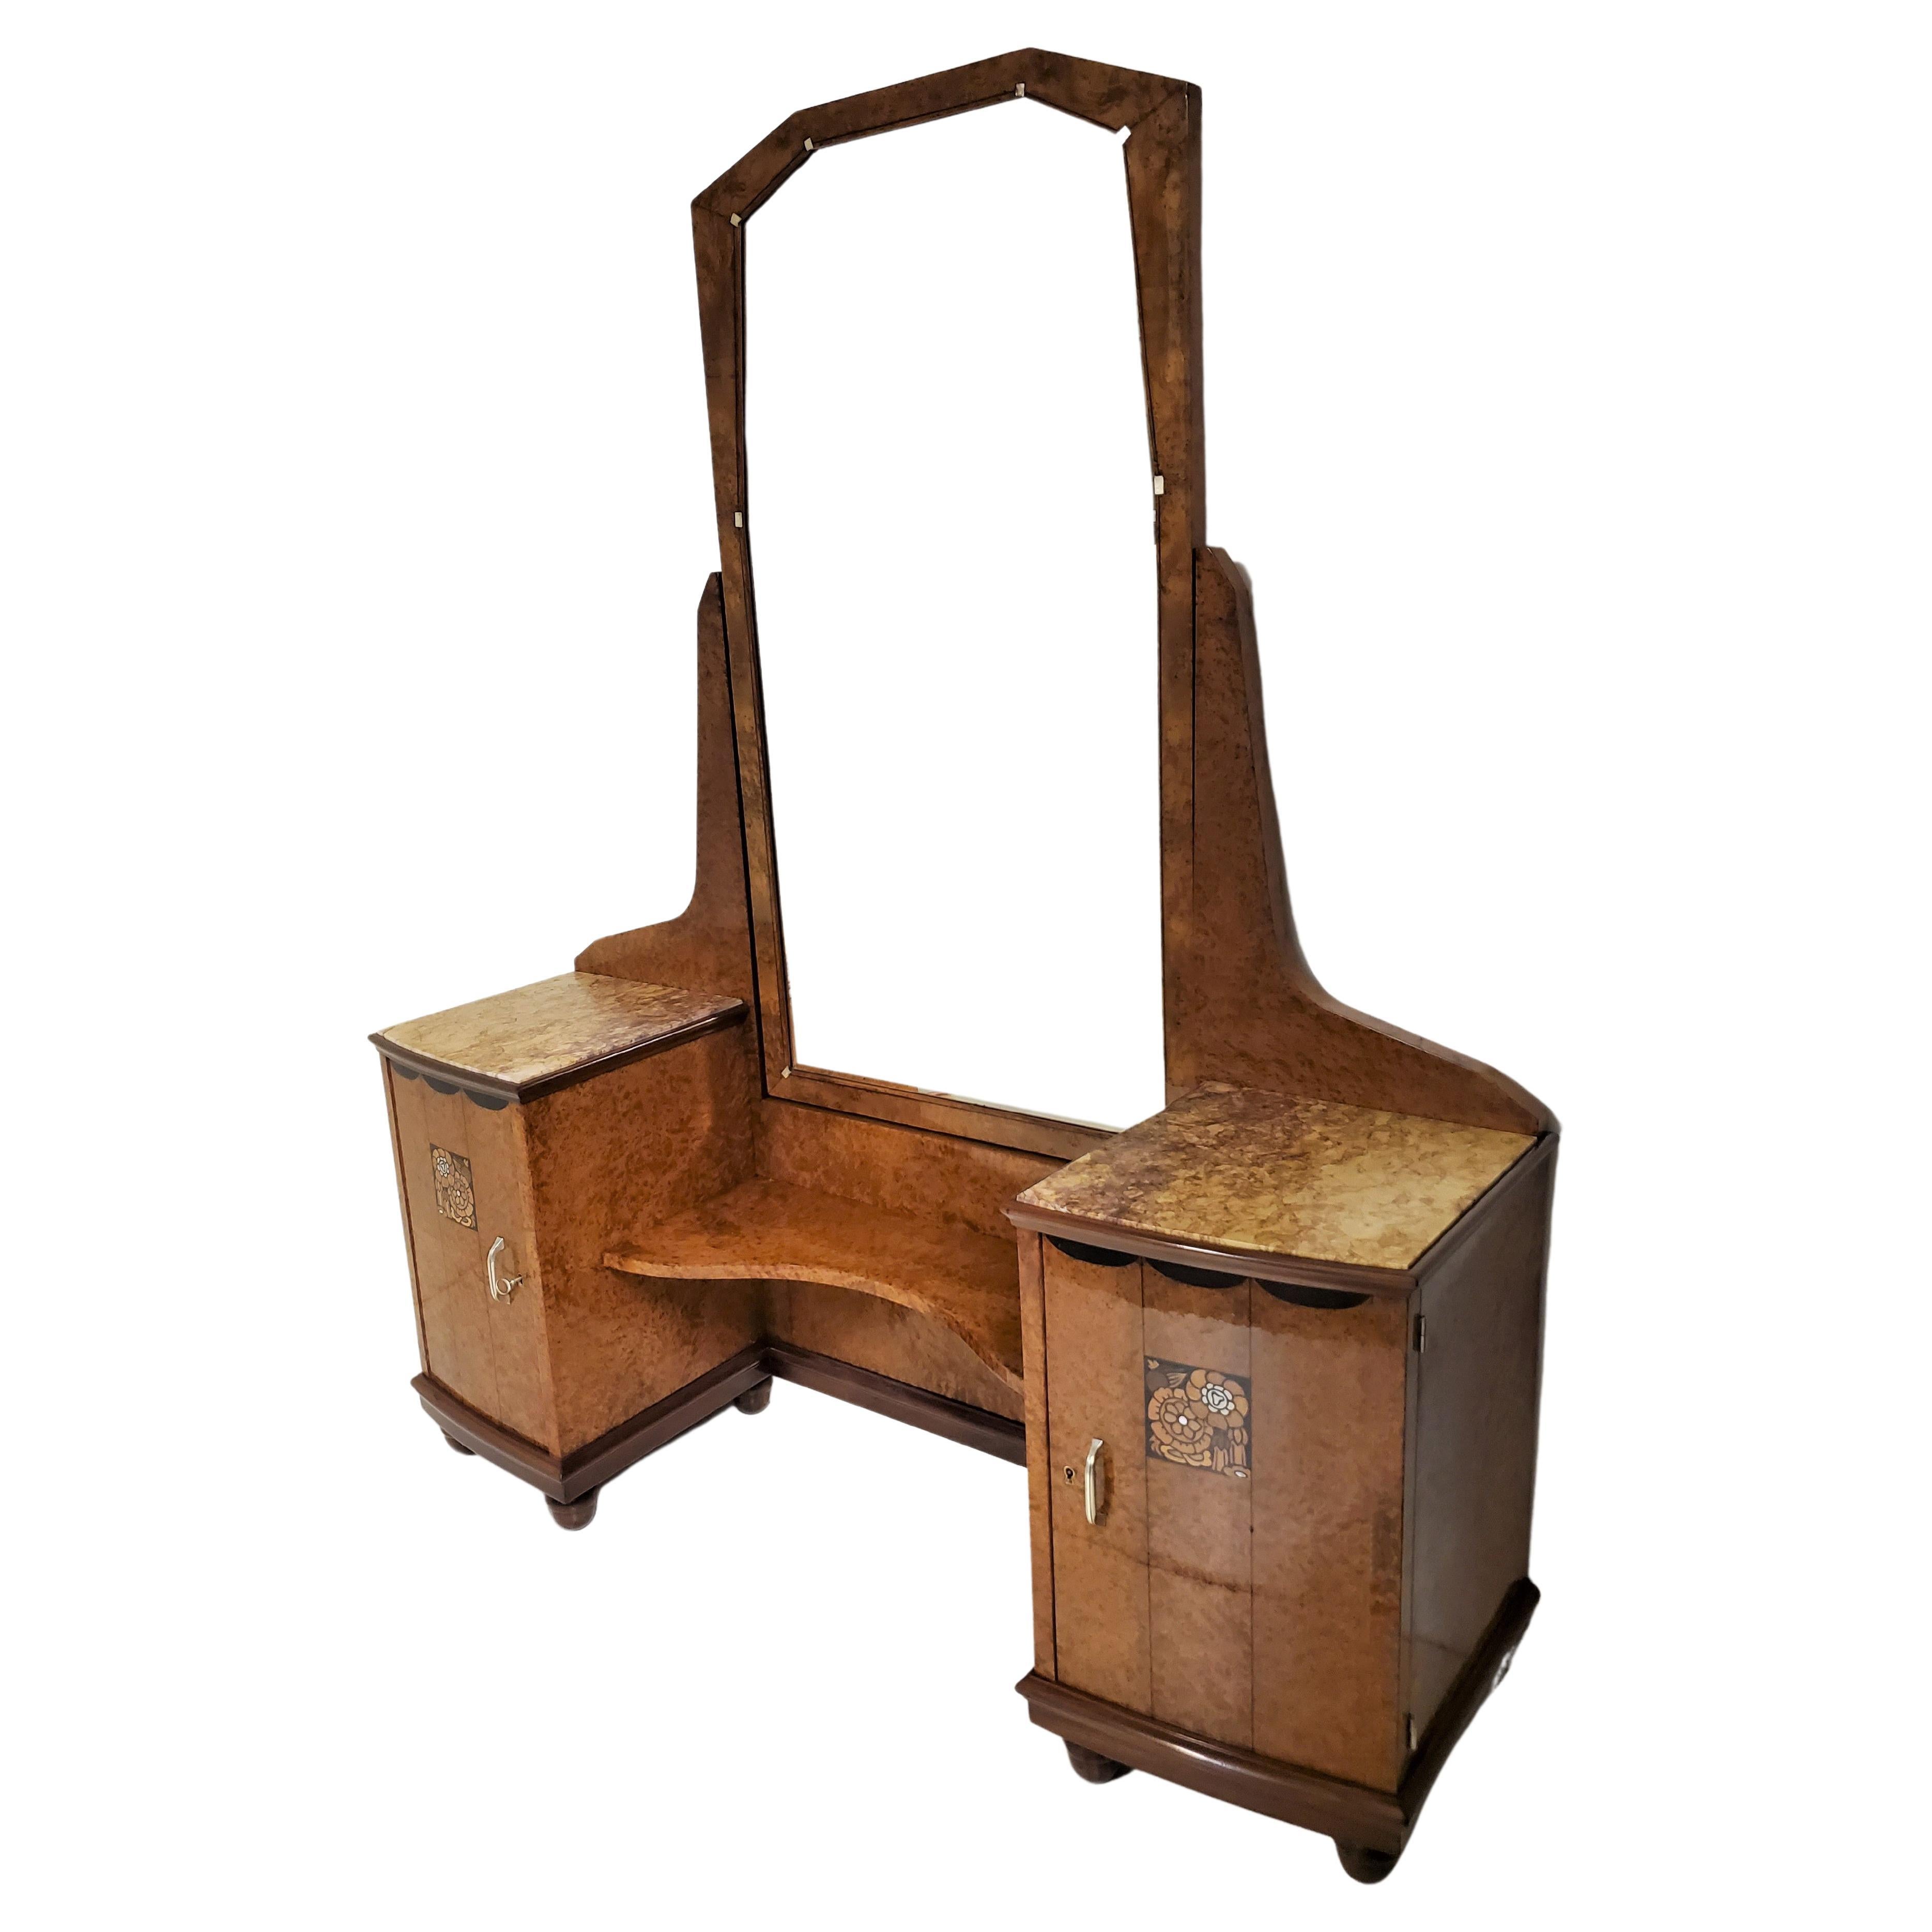  Important and spectacular French Art Deco vanity in beautifully figured thuya wood, attributed to Maurice Dufrène.
Created in full burl wood with marquetry inlay, this vanity has the original beveled
 cheval mirror that slightly swivels, along with